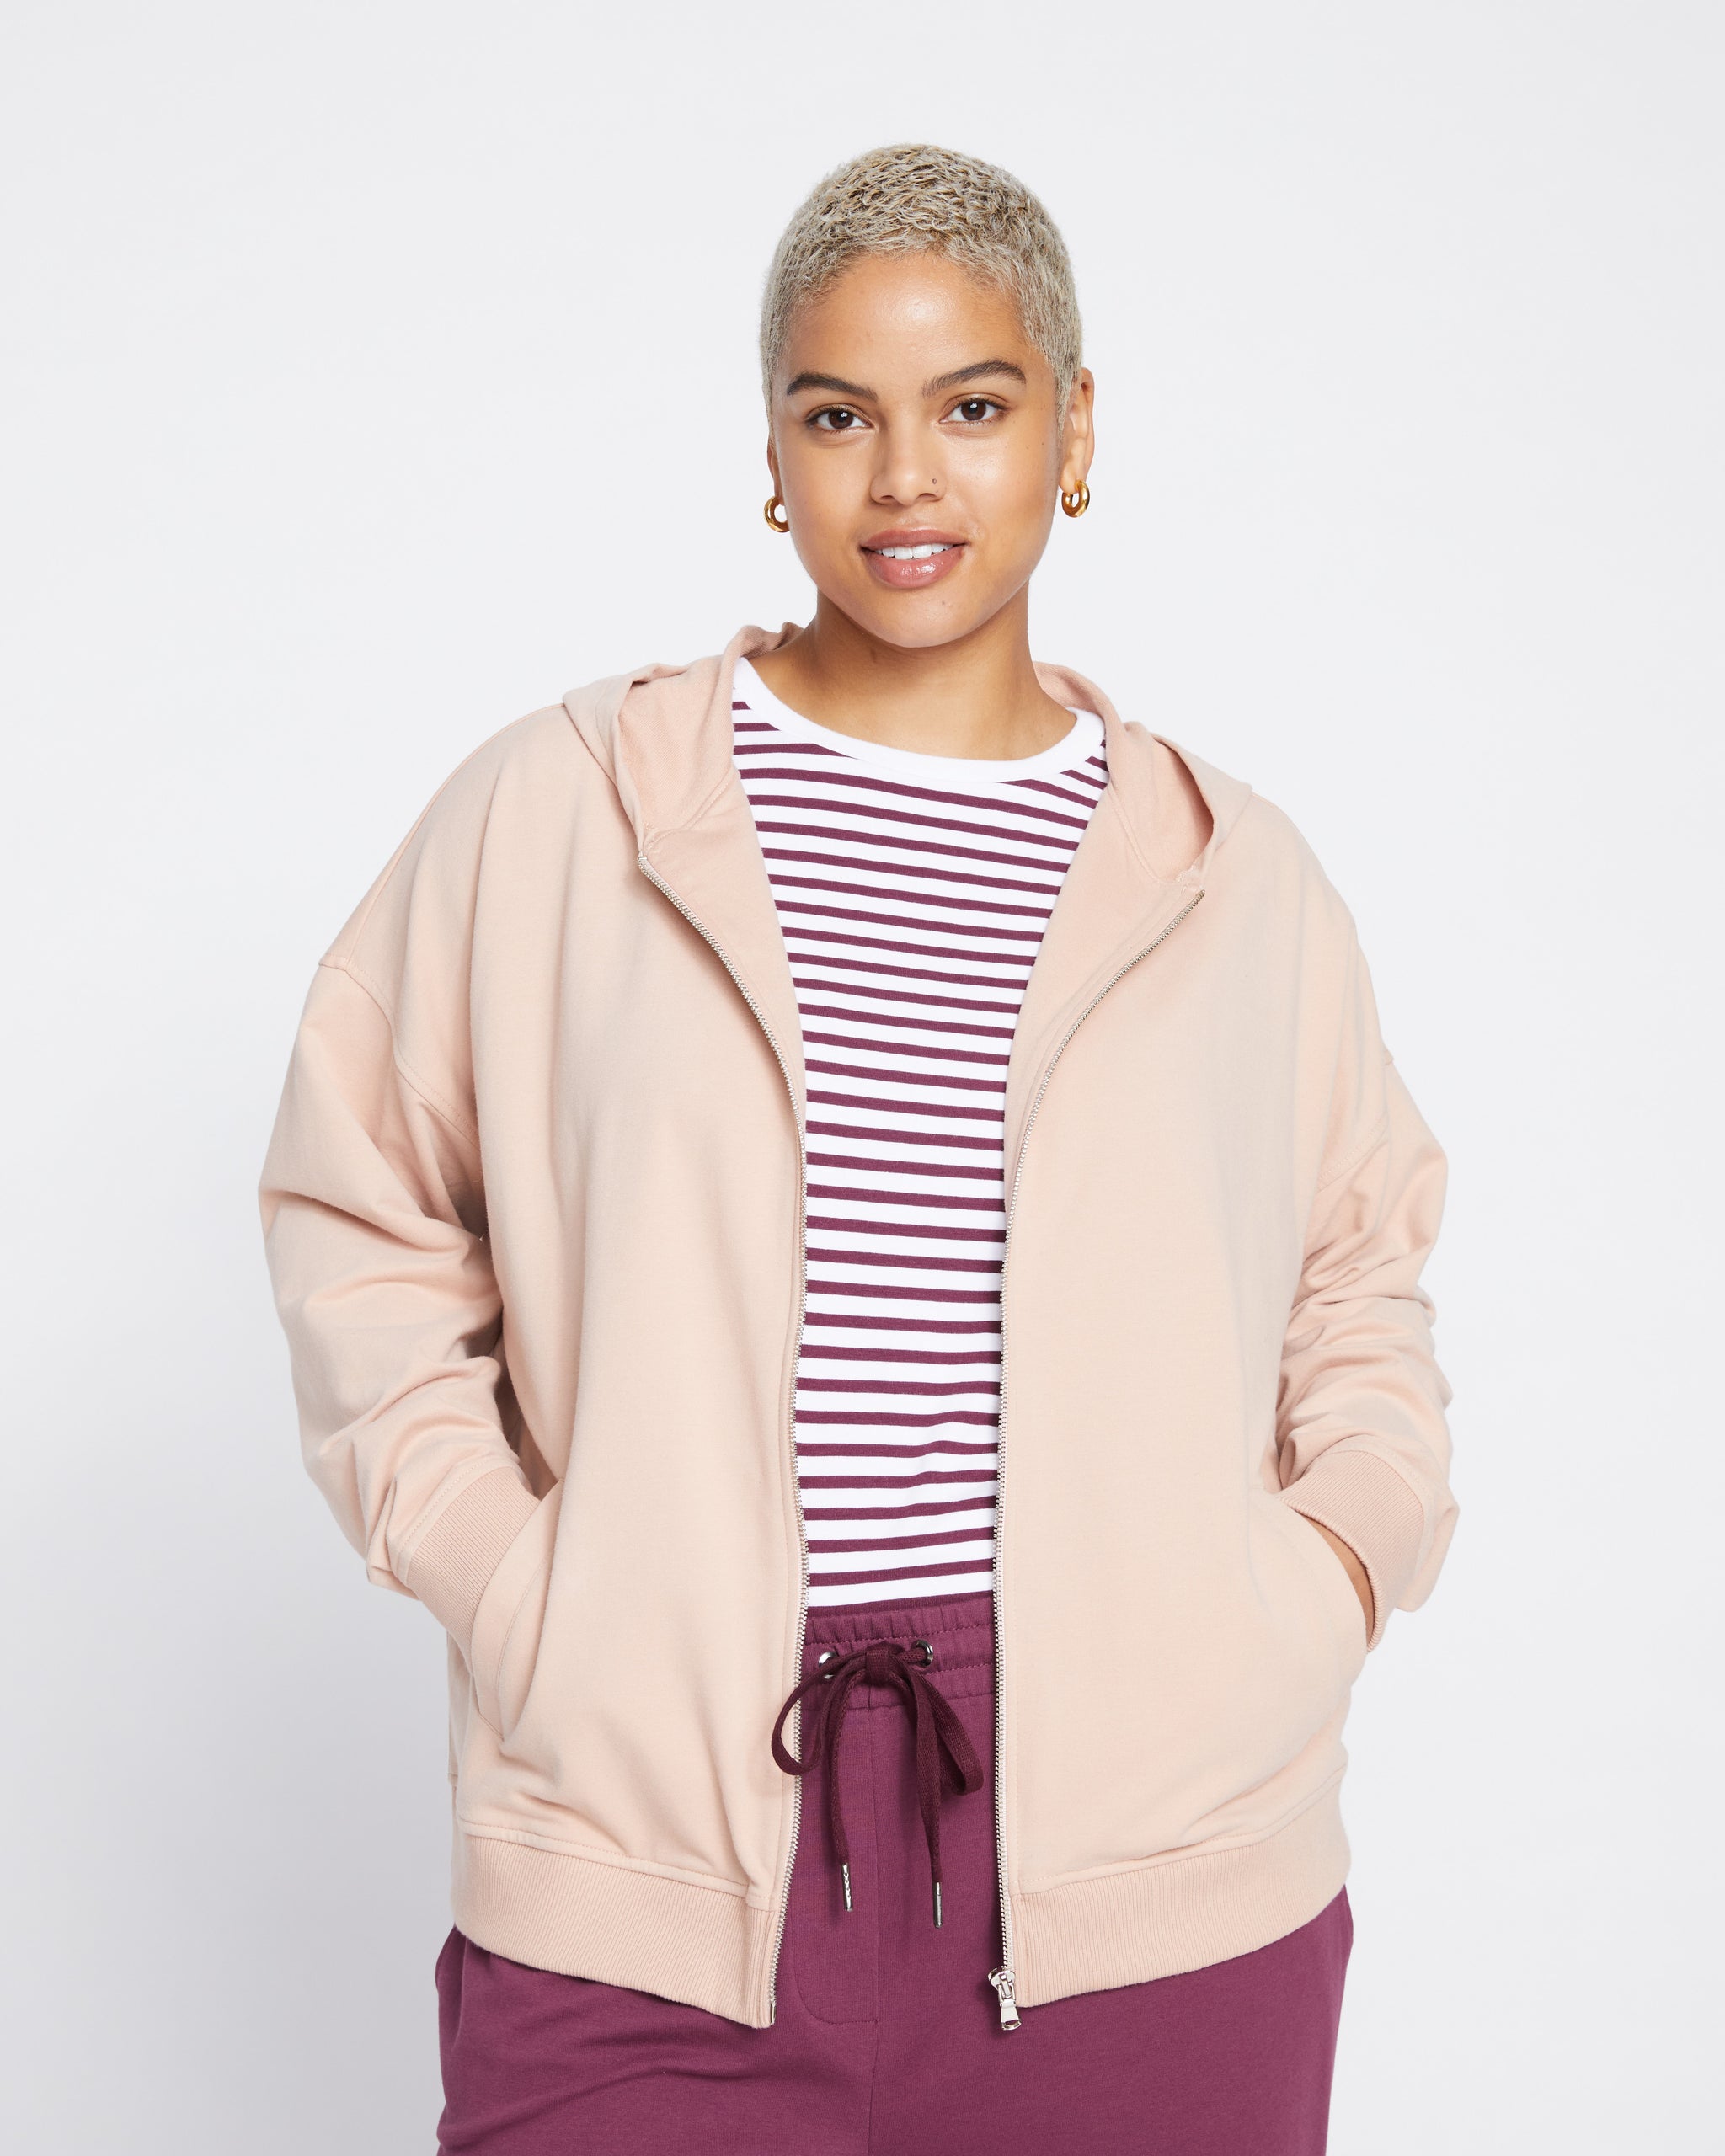 Fundamental French Terry Zip Up Hoodie - Mahogany Rose